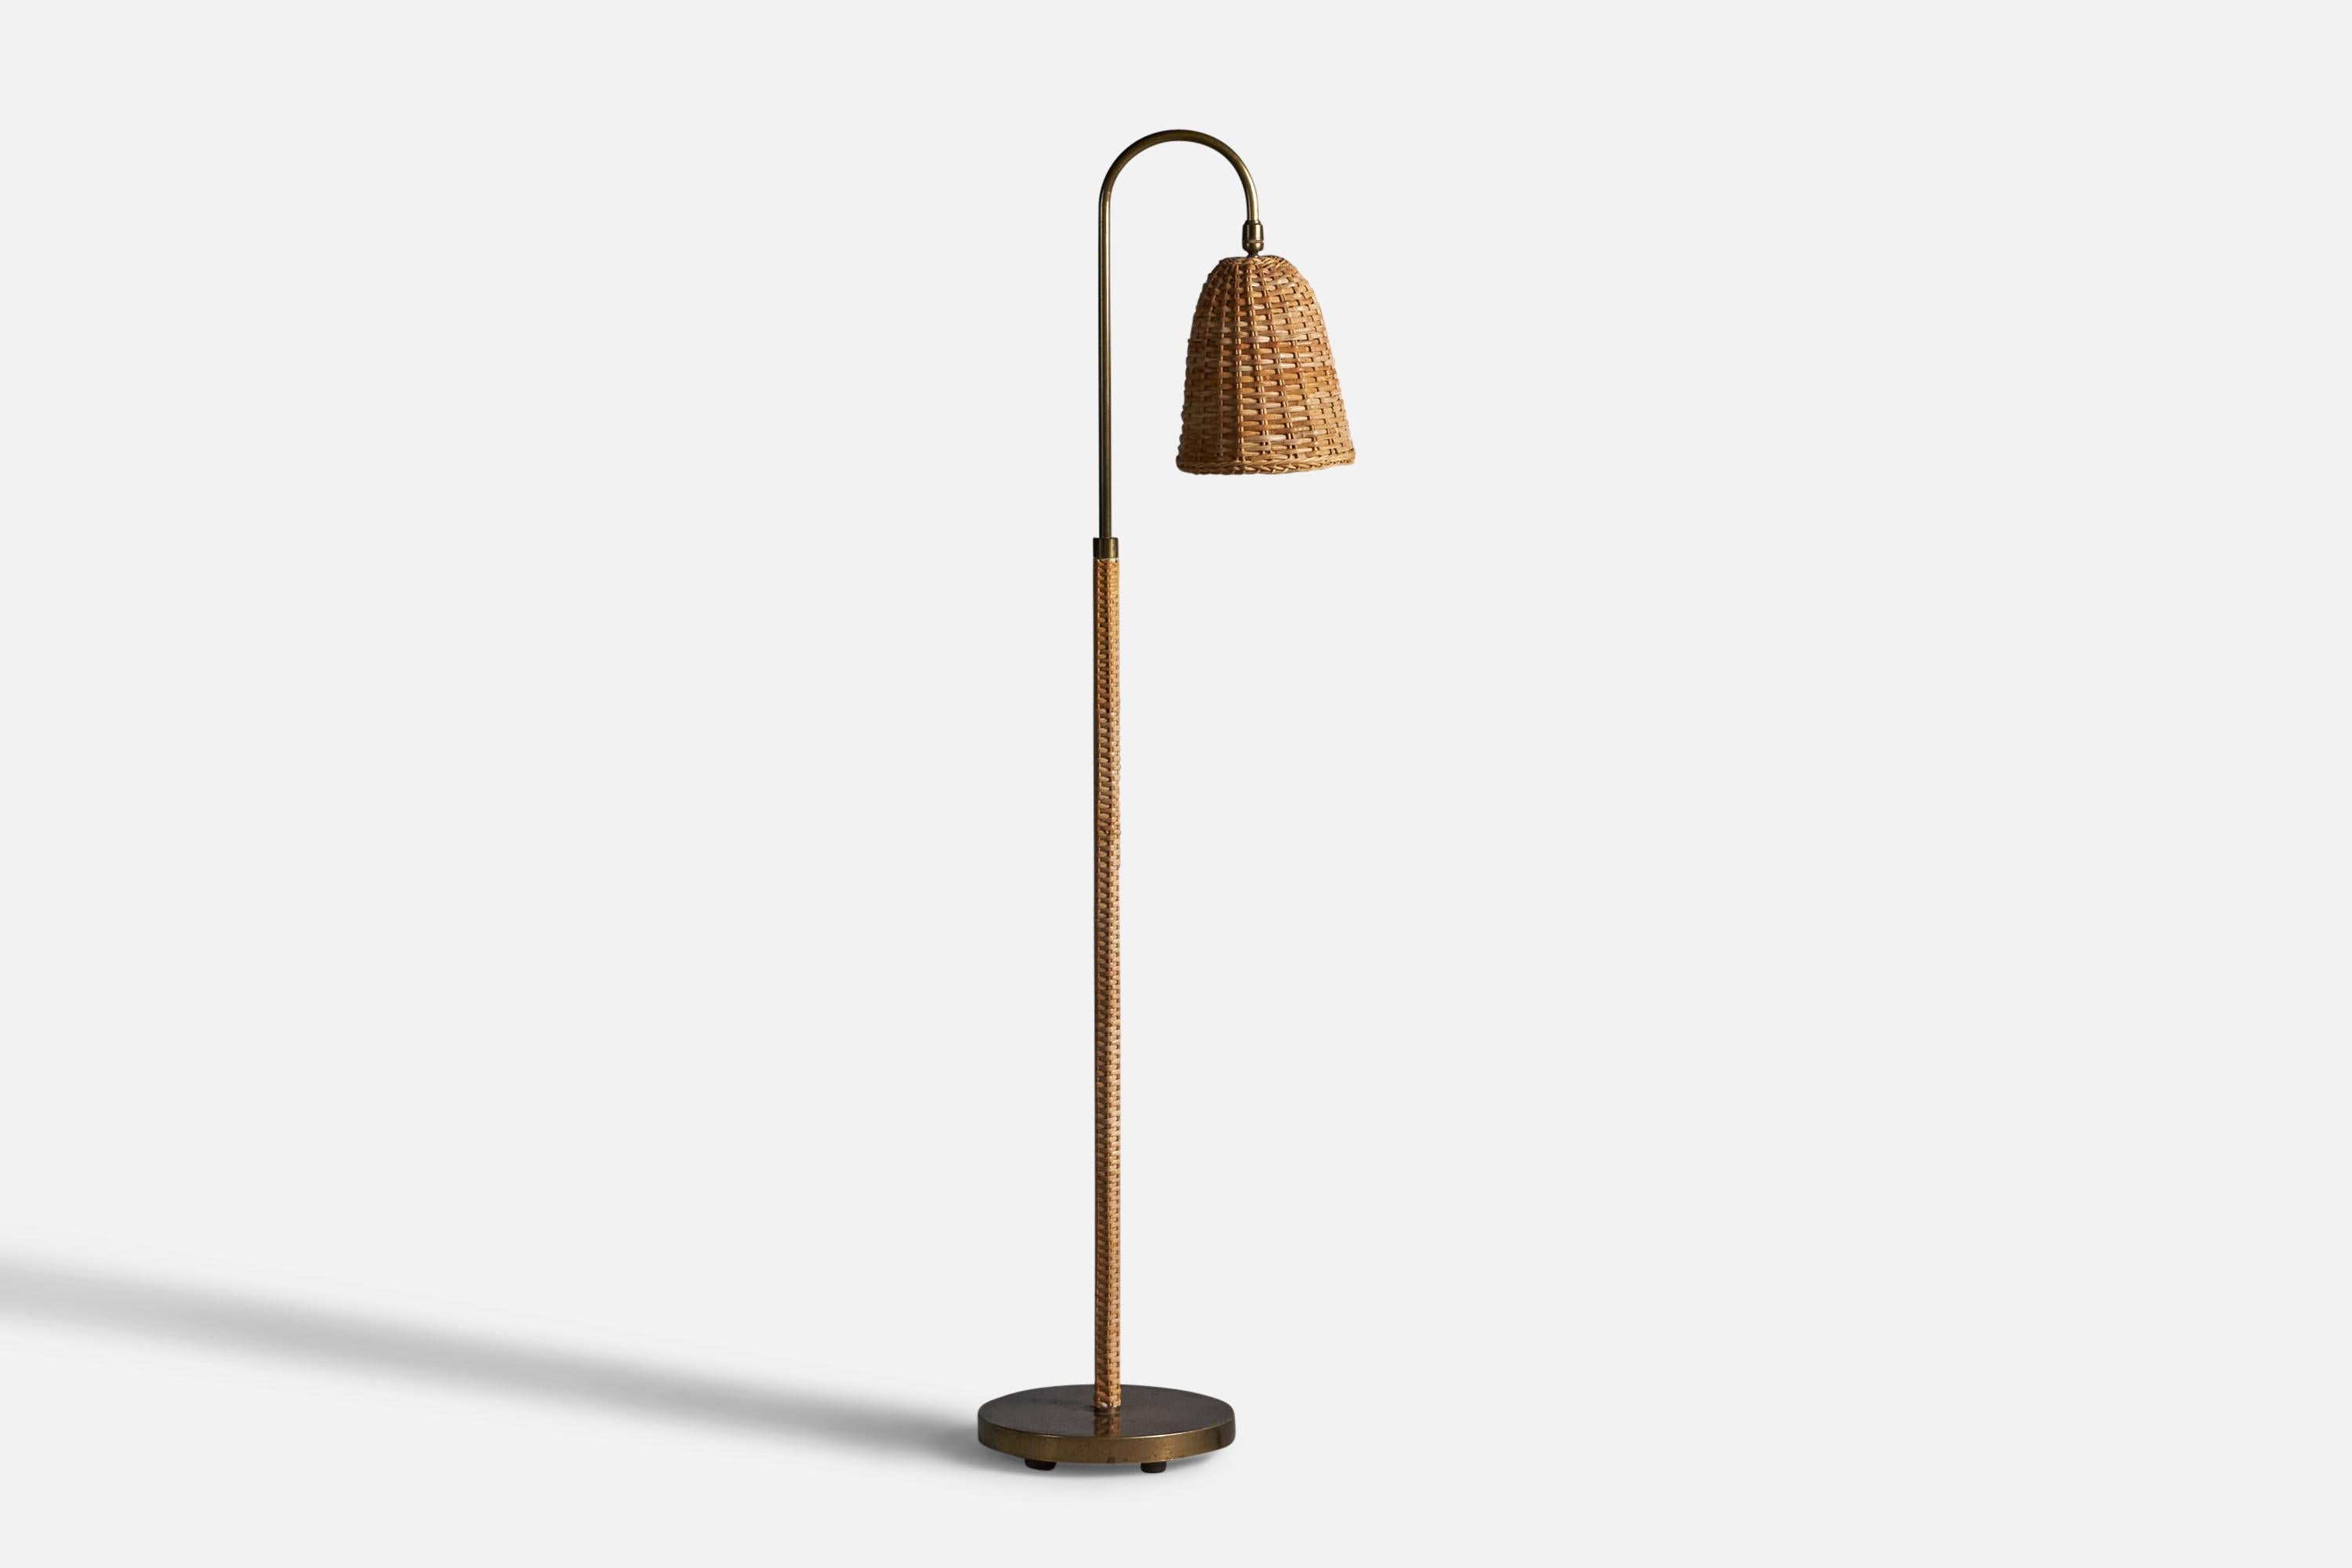 A rattan and brass floor lamp, designed and produced in the US, 1950s

Overall Dimensions: 51